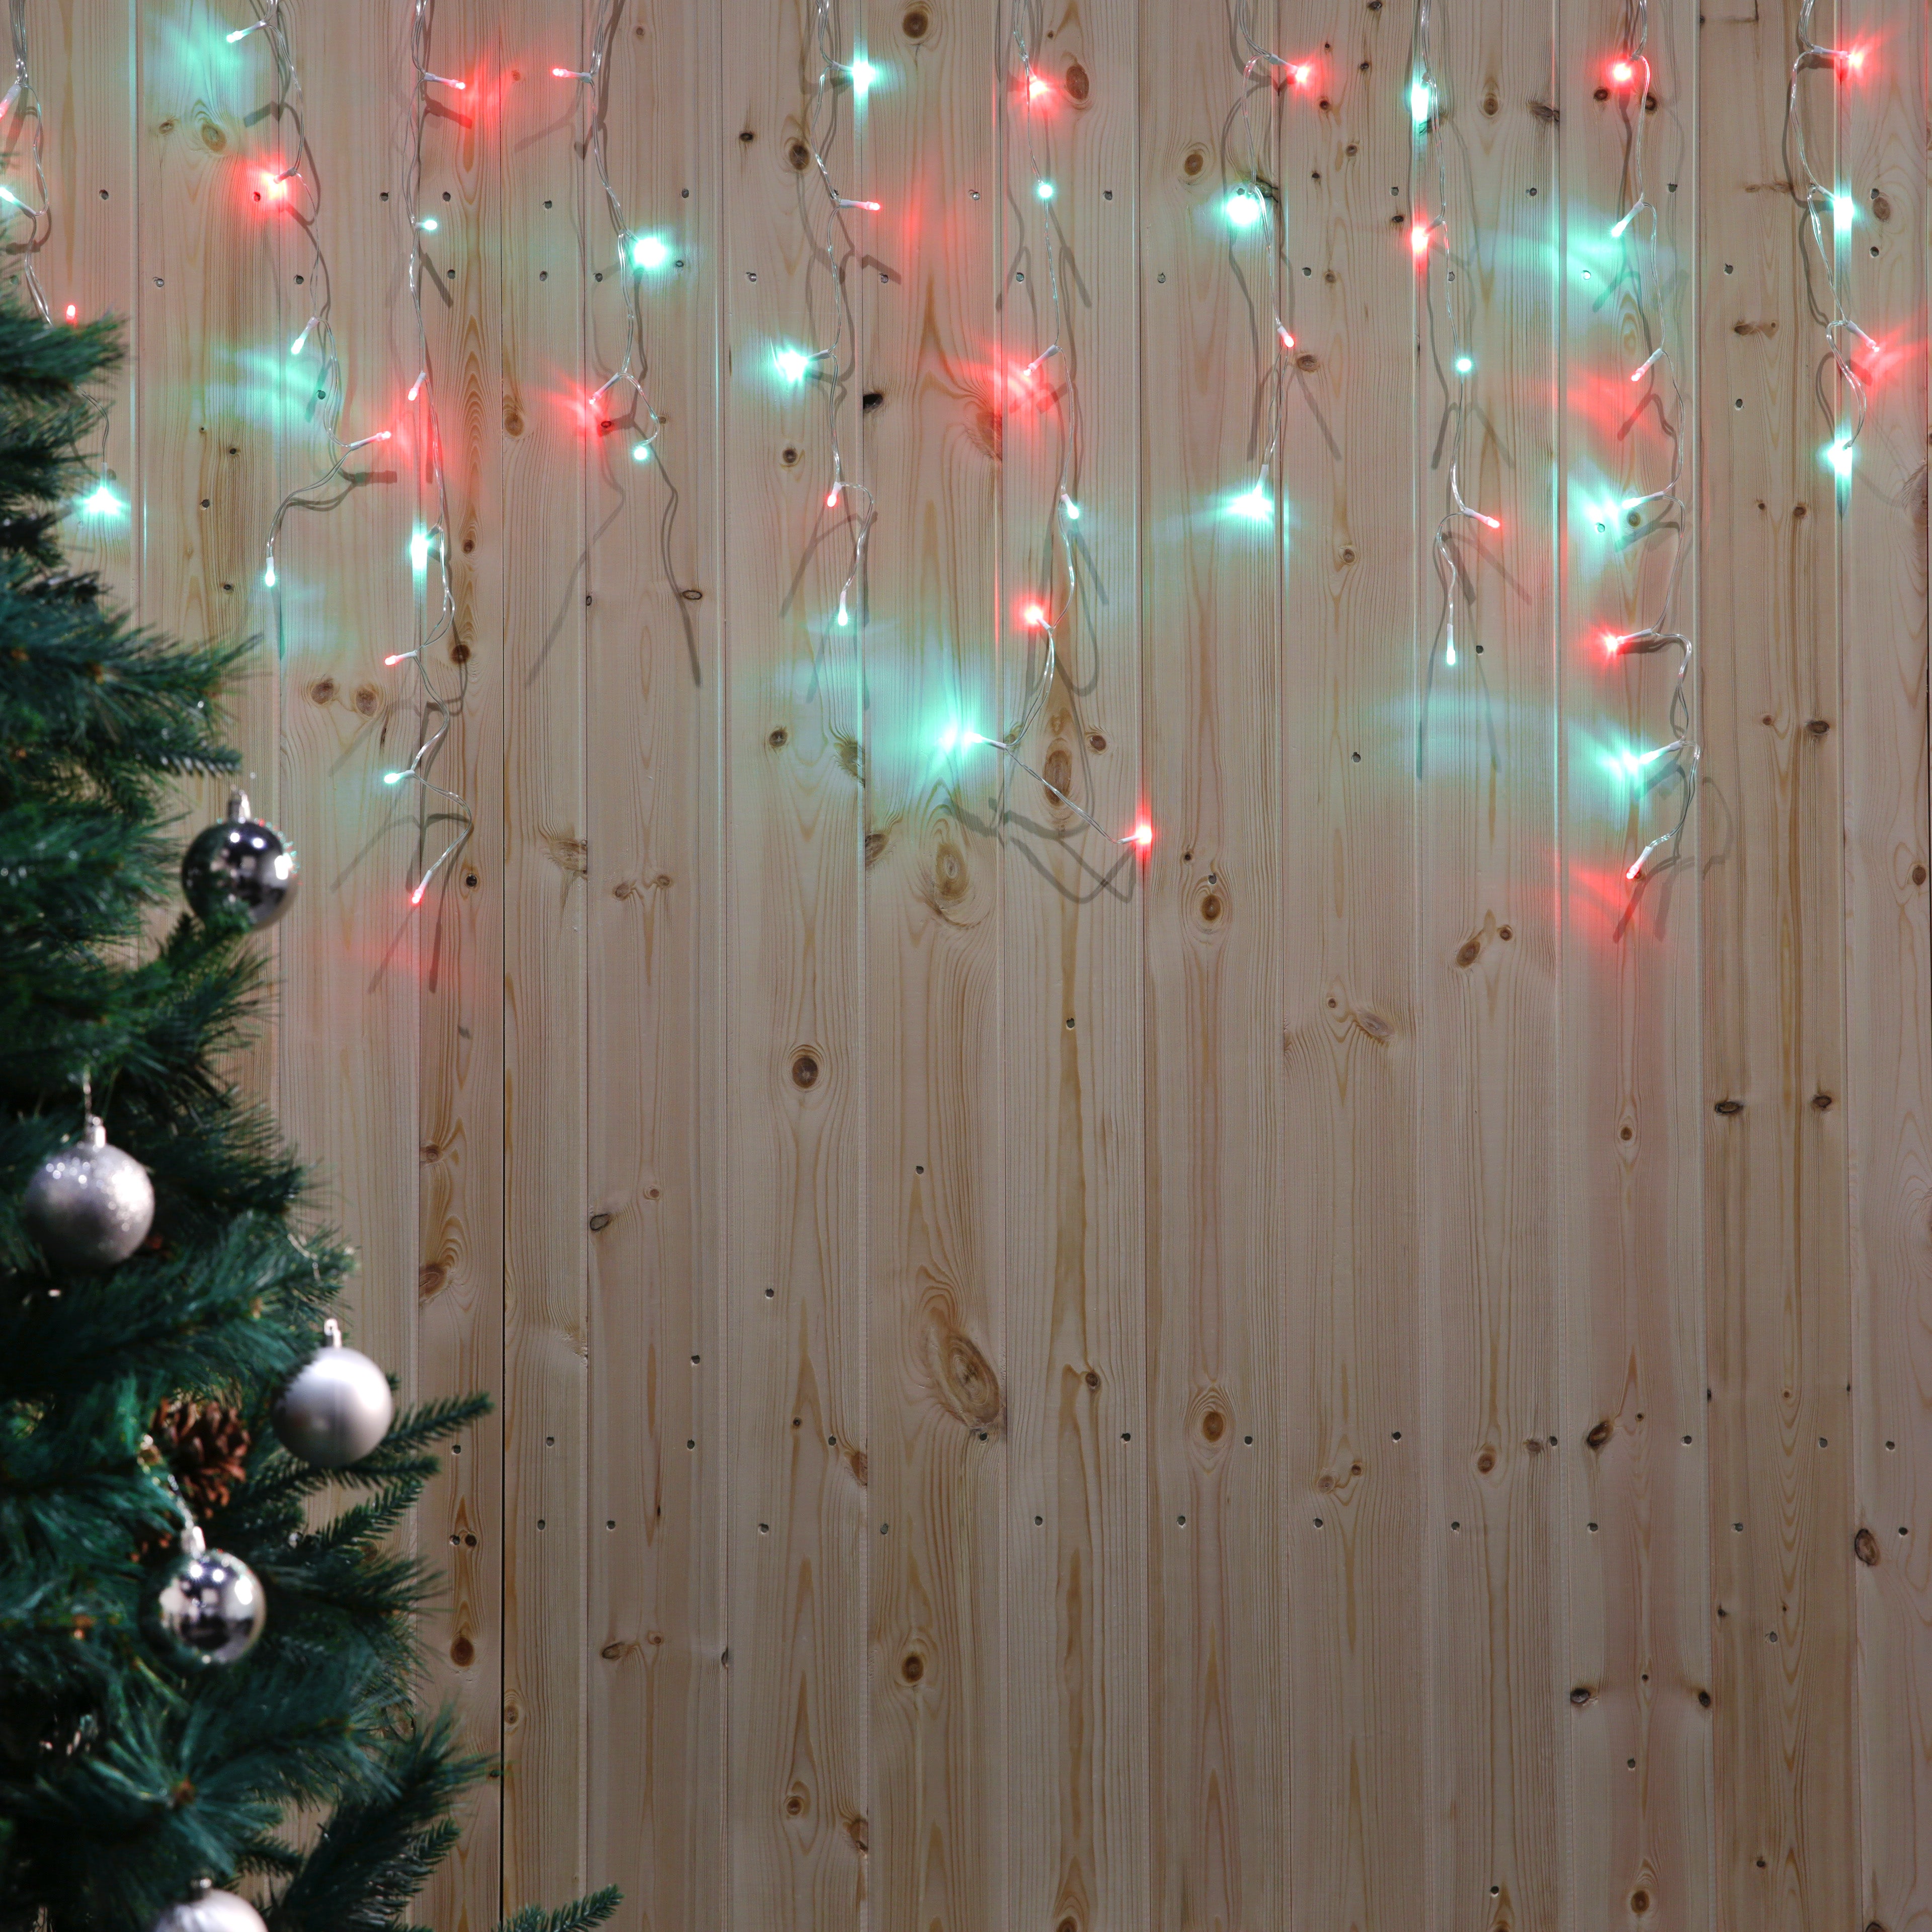 Red & Green LED Icicle Lights 10m